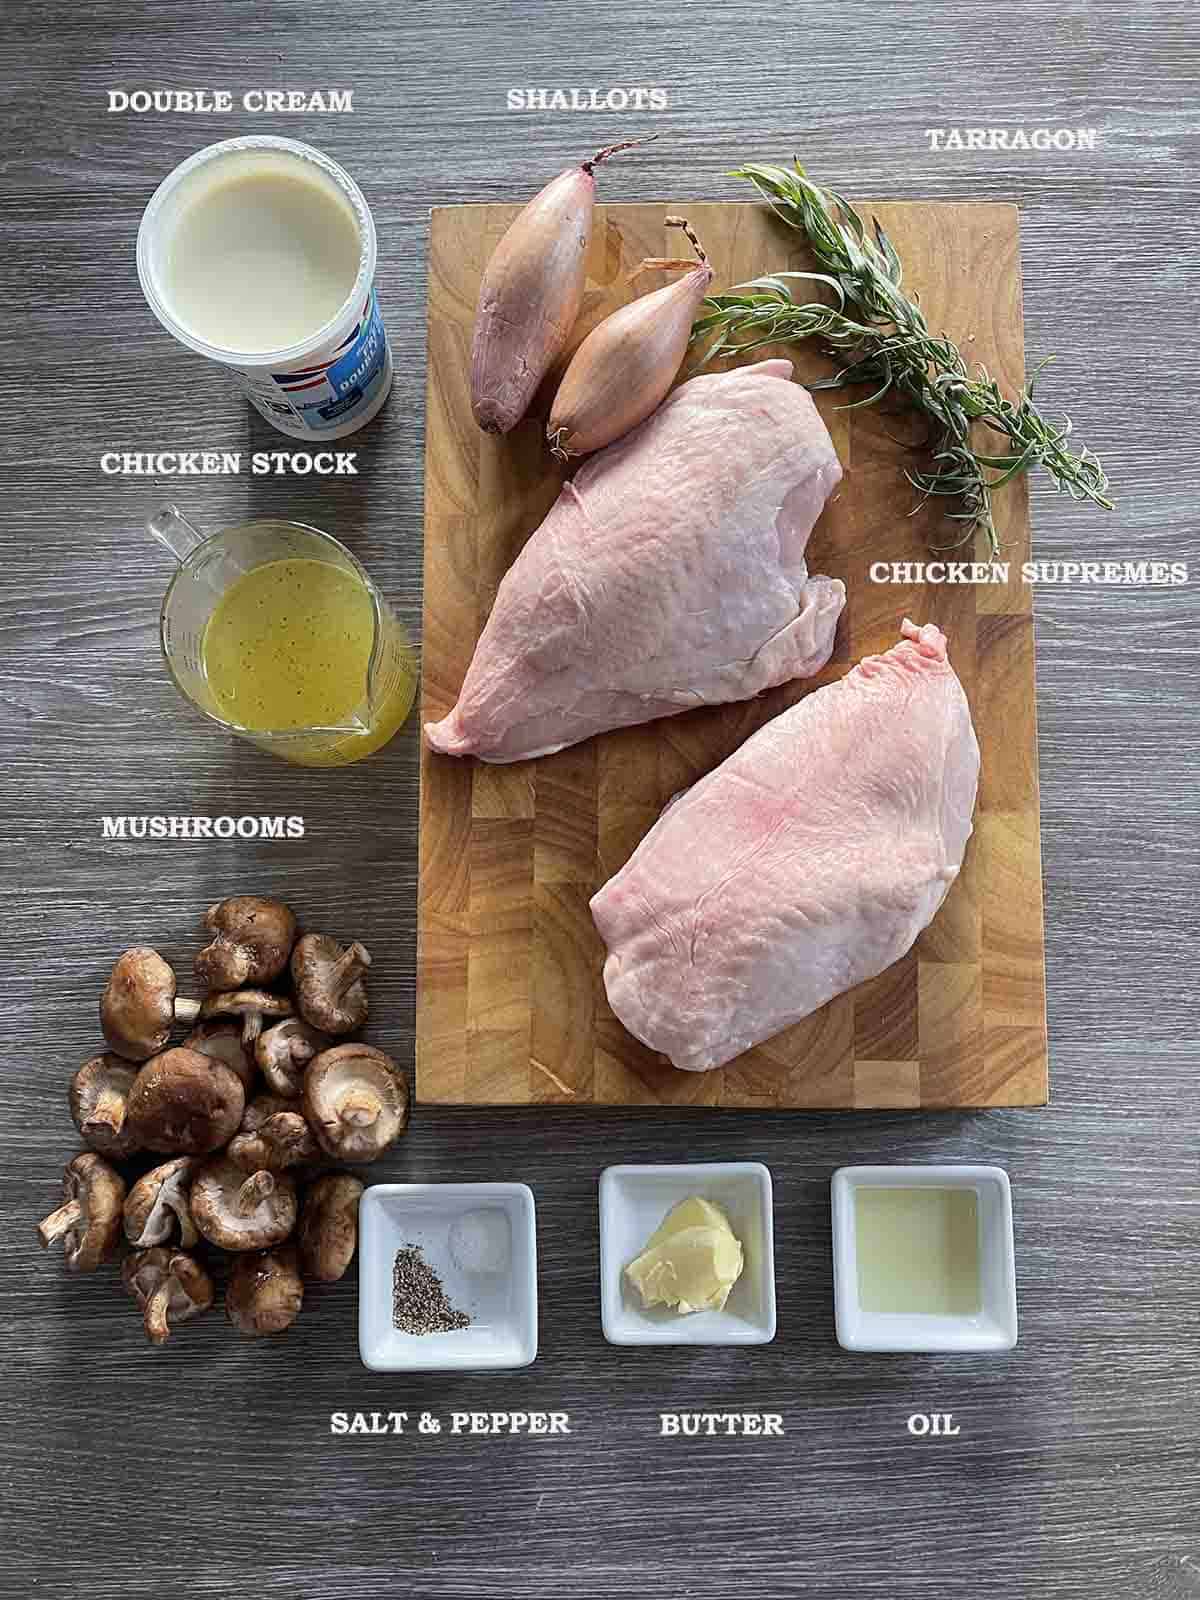 ingredients including chicken, cream and mushrooms.